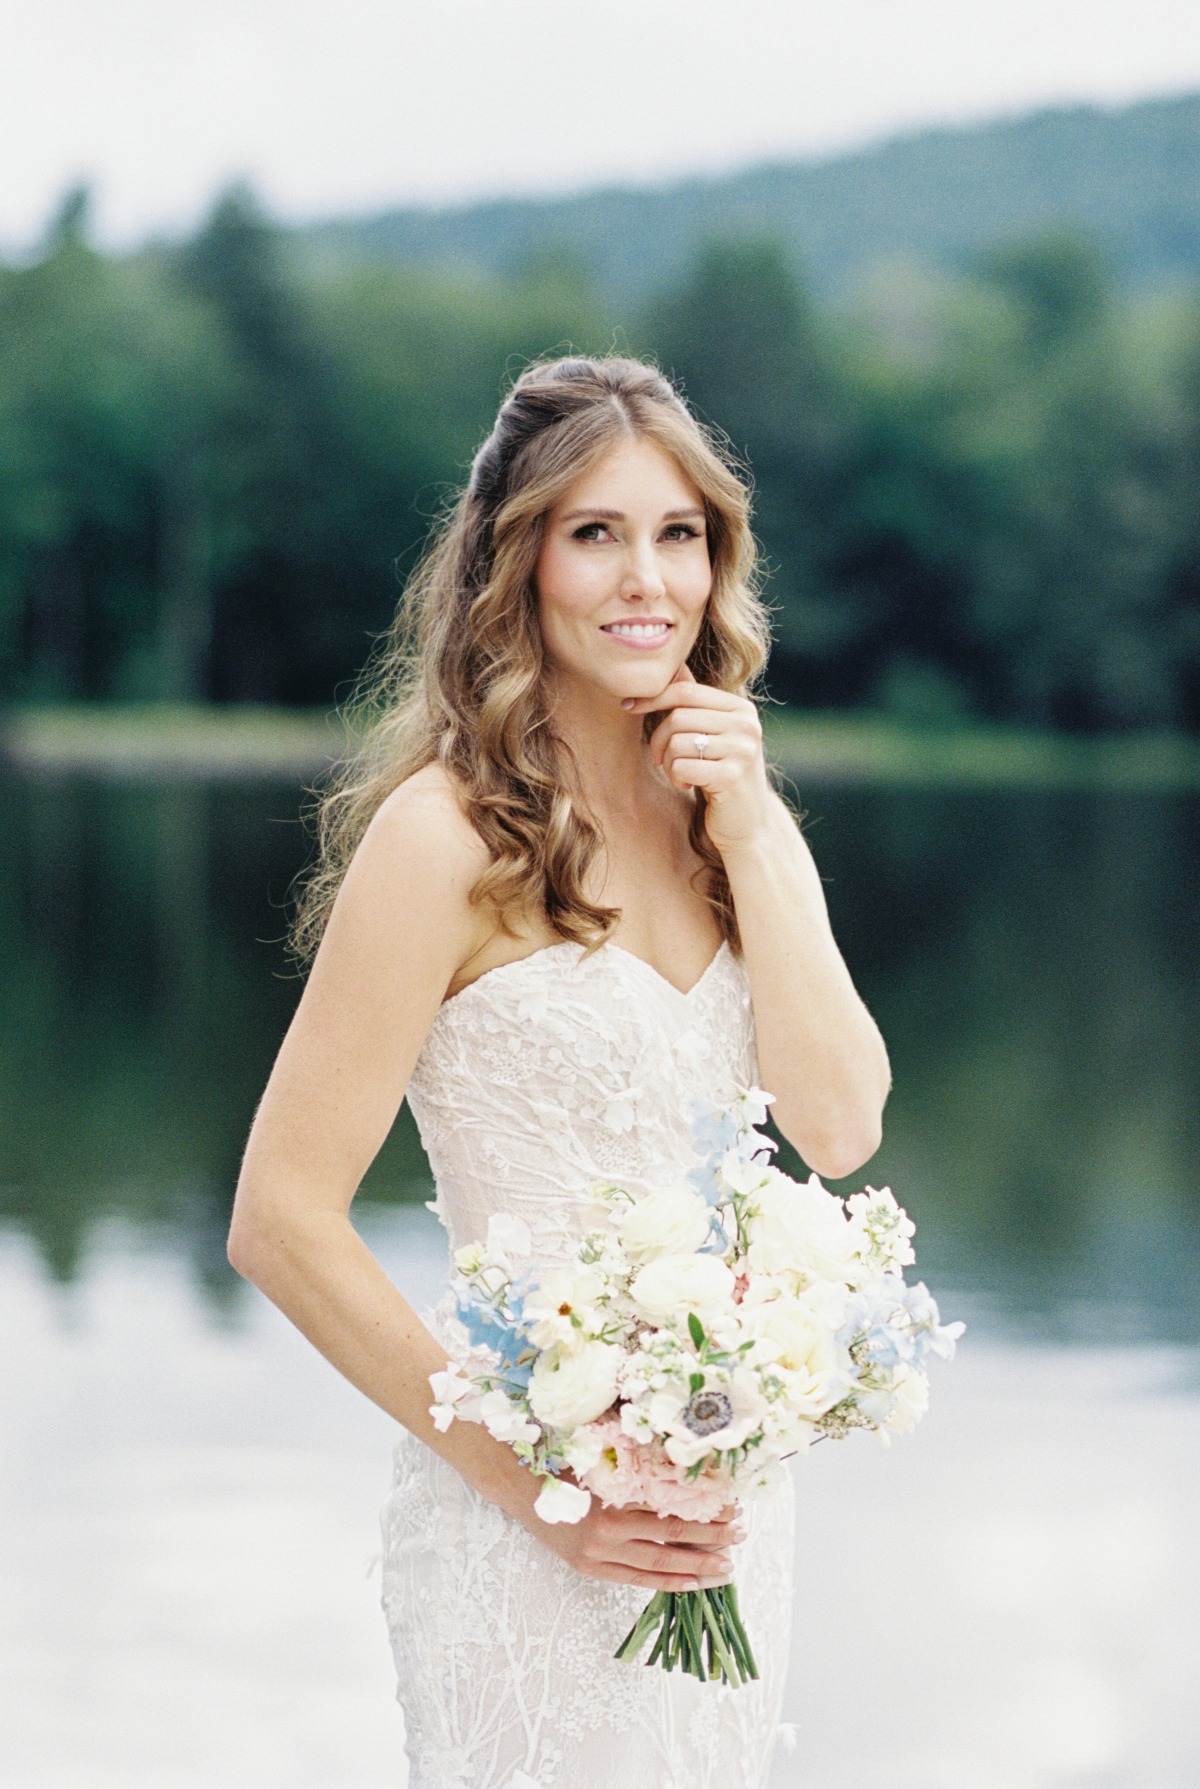 Beautiful natural bridal glam for elevated garden party wedding